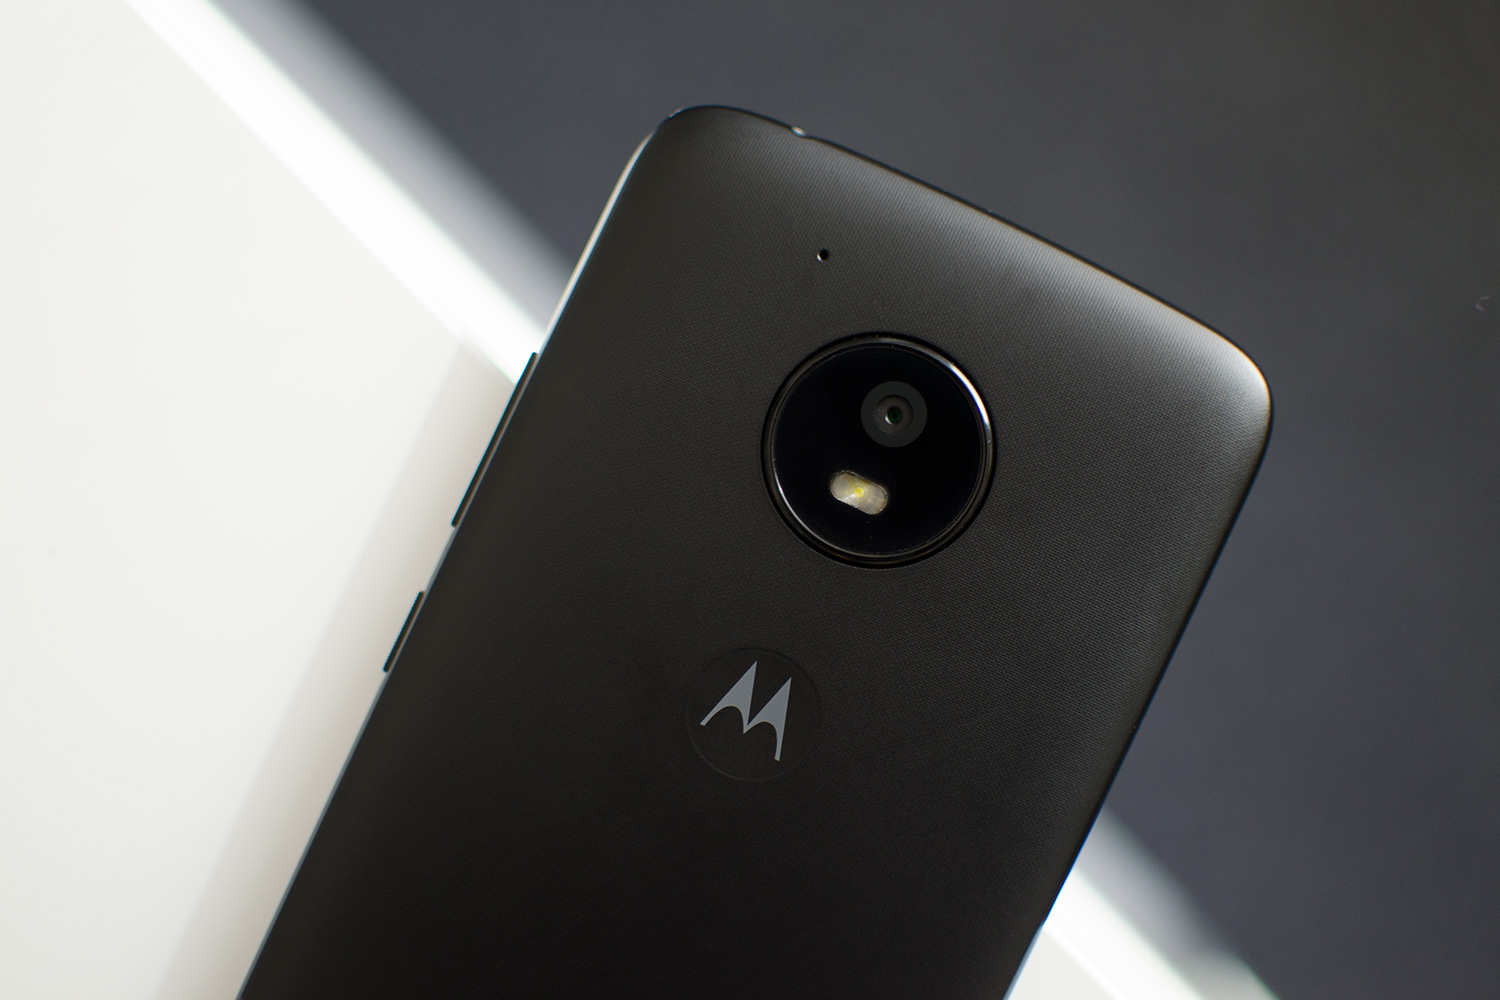 Moto G4 Plus Turns off Automatically on Receiving Incoming Call